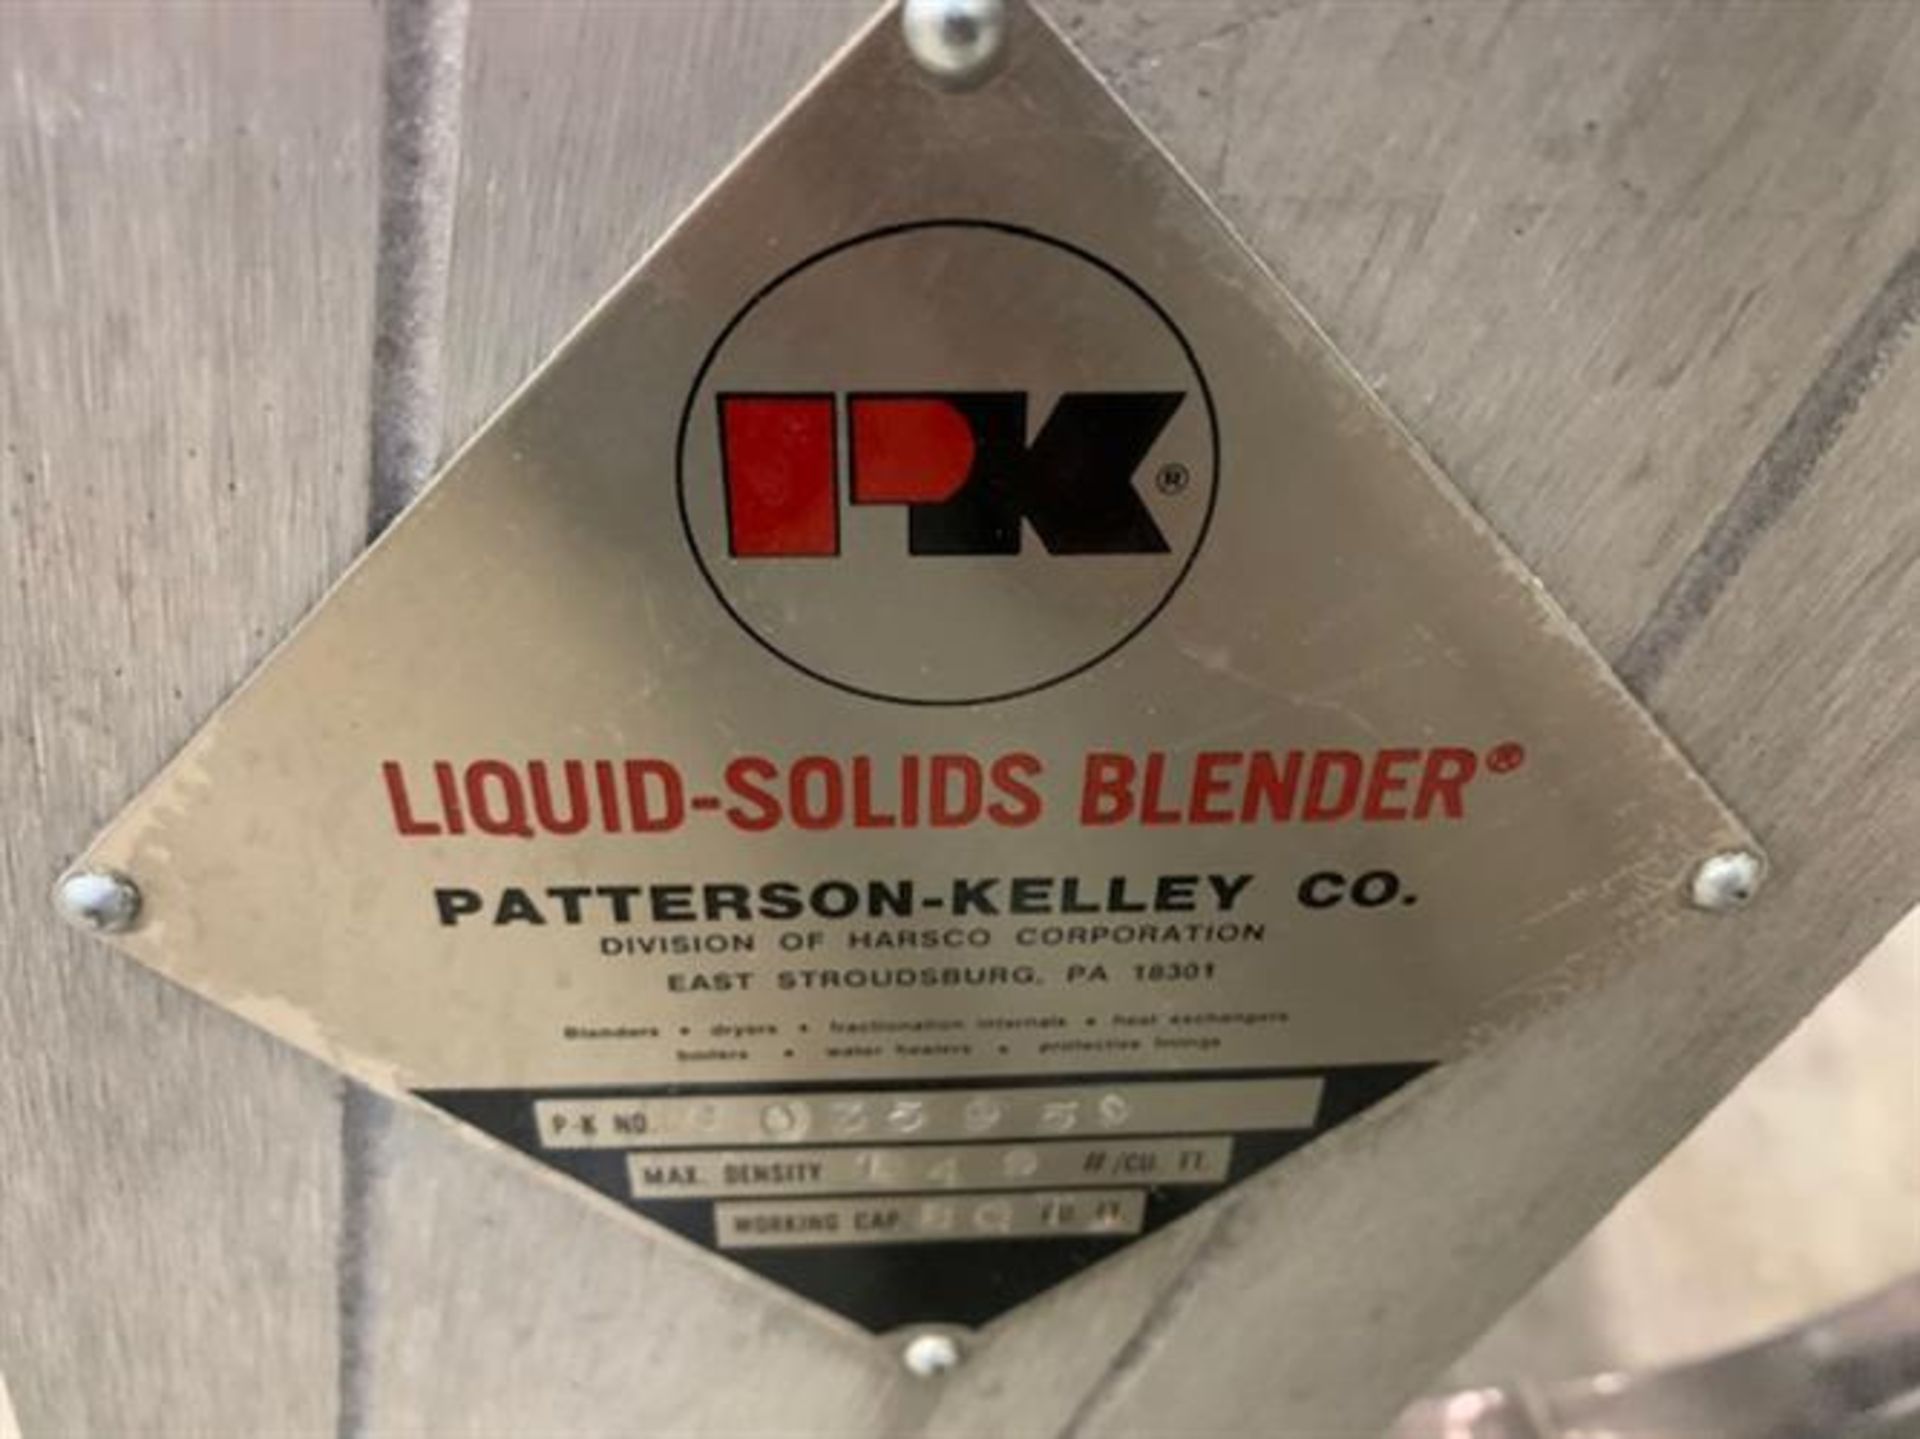 Patterson Kelley Stainless Steel 8 quart V-Blender - 140 lb/cuft - Drive for liquid/solid - Image 5 of 5